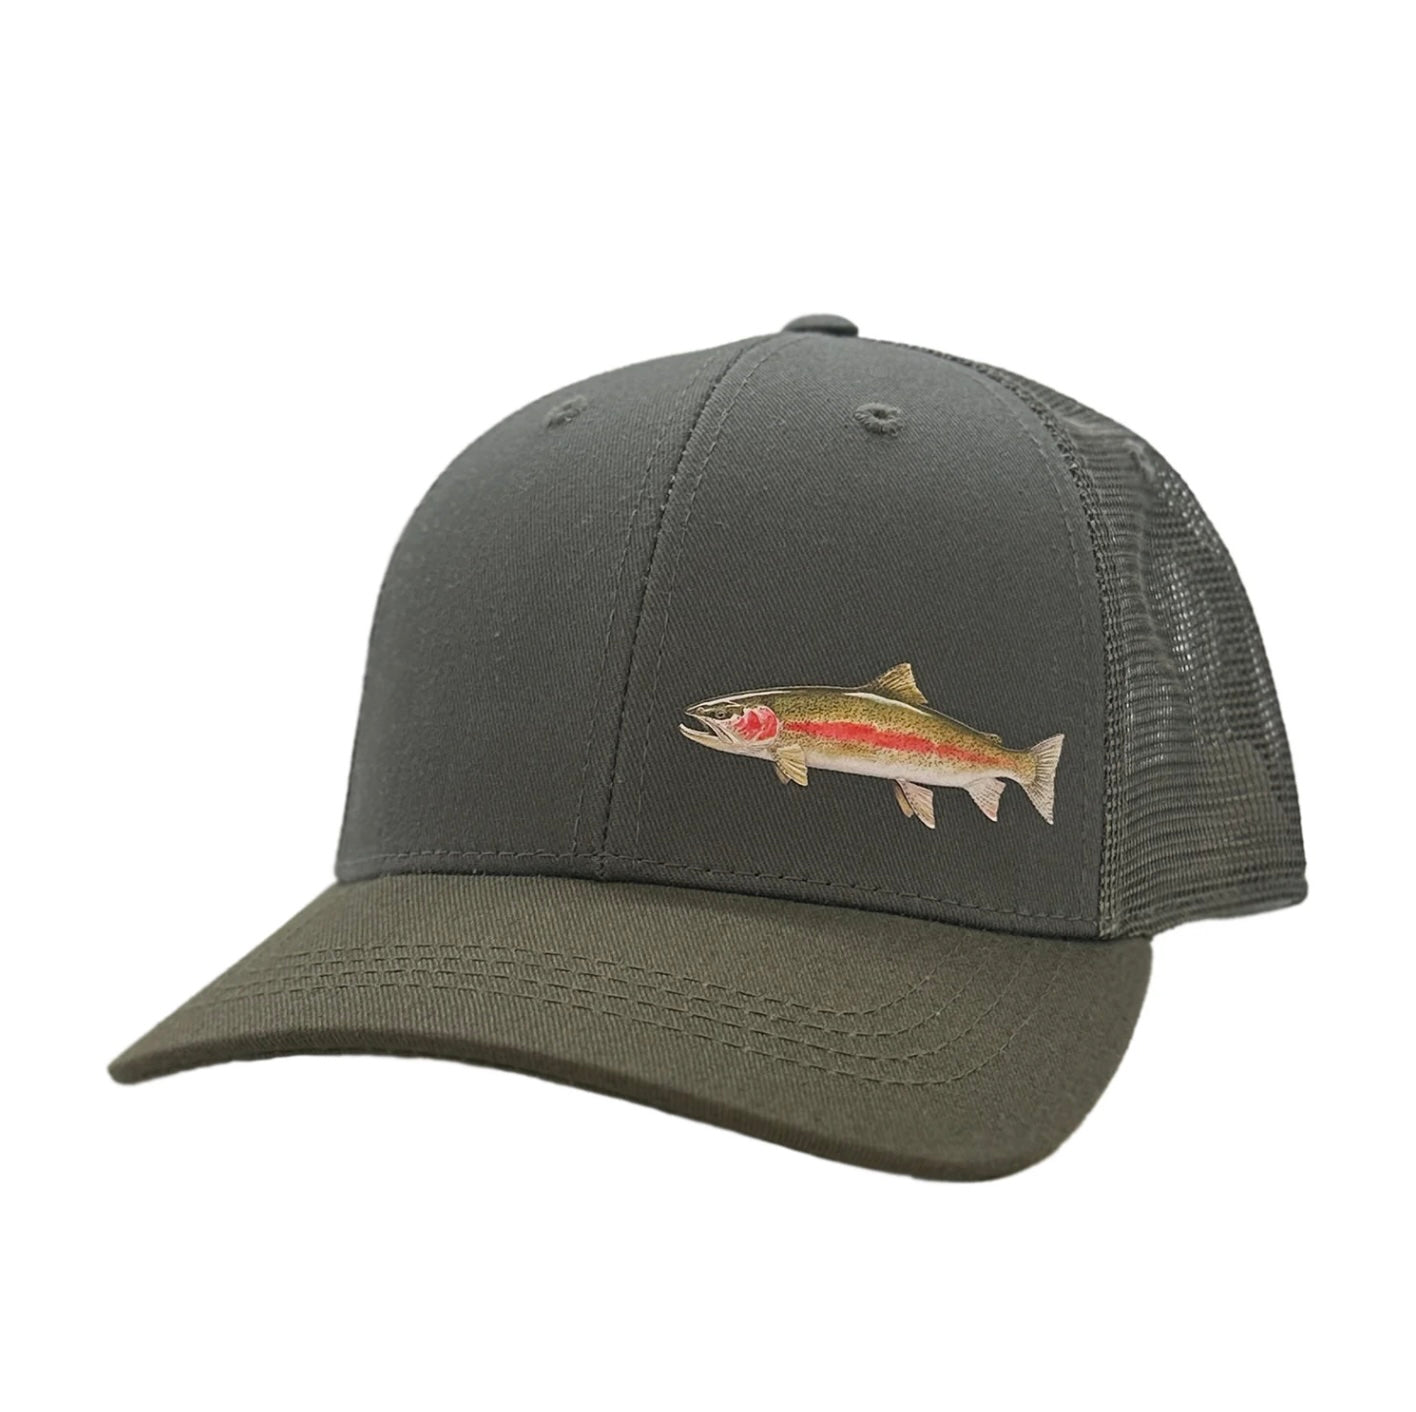 RepYourWater Tailout Series Rainbow Hat